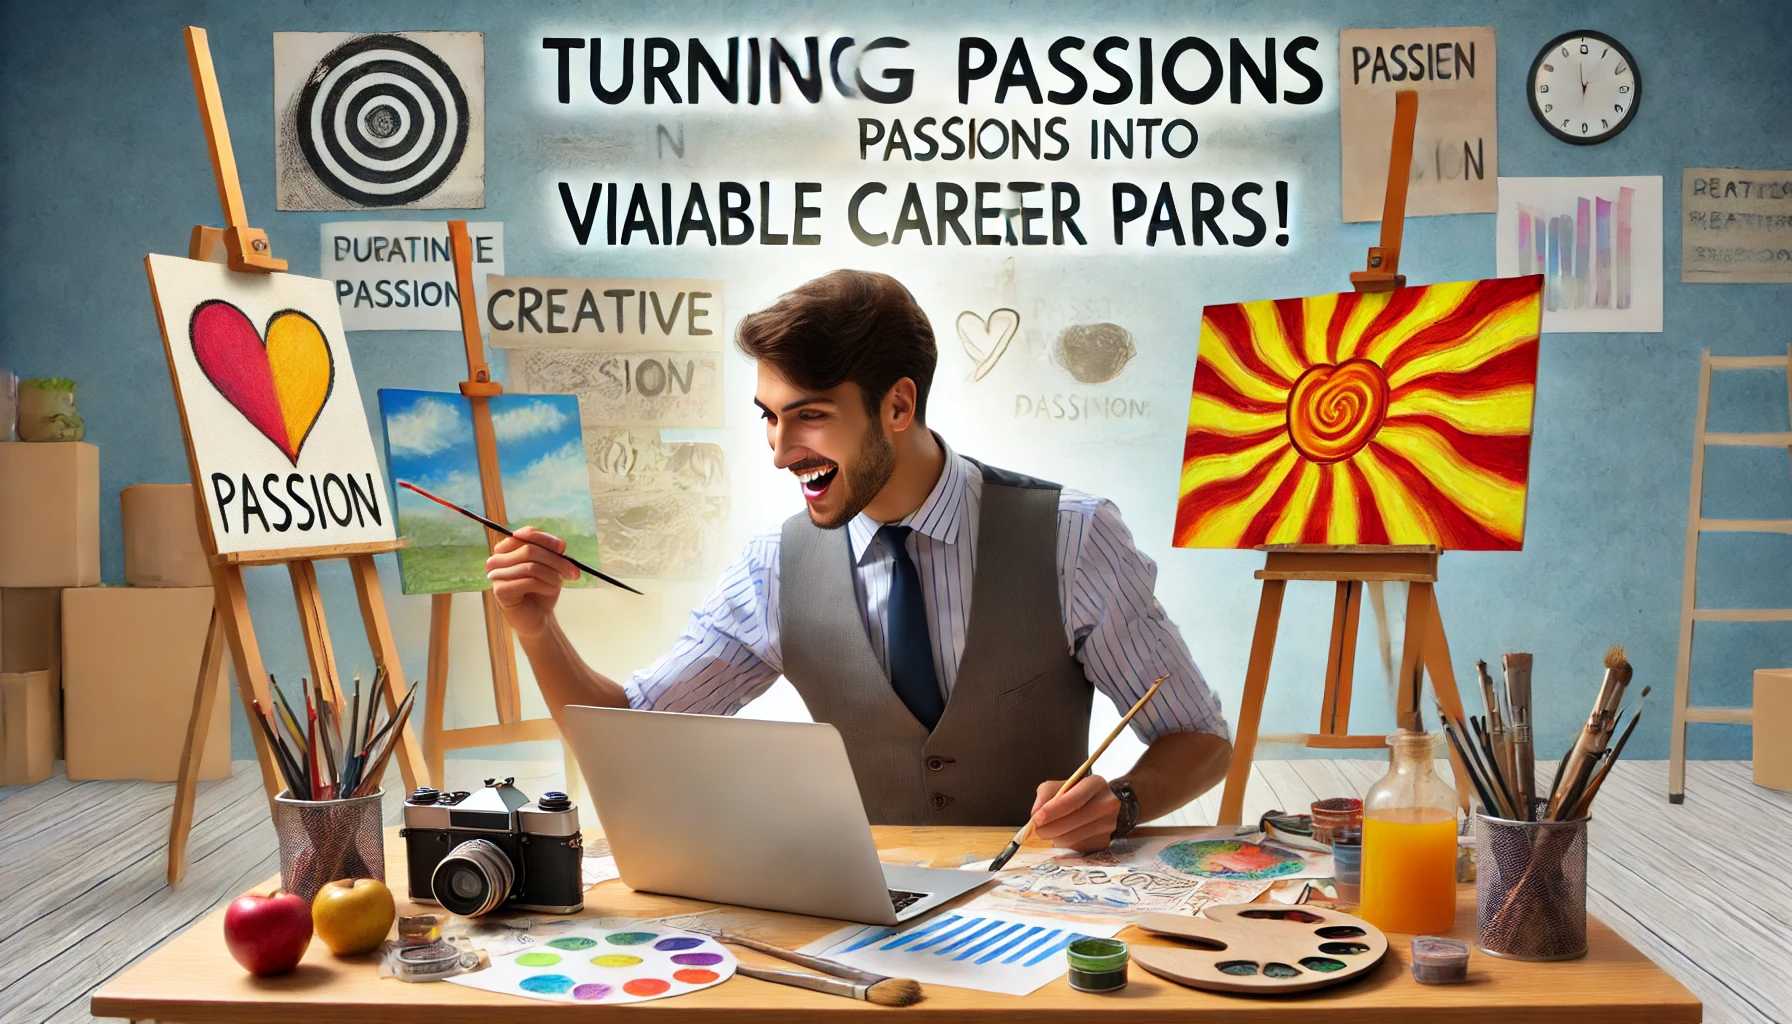 Turning Passions into Viable Career Paths